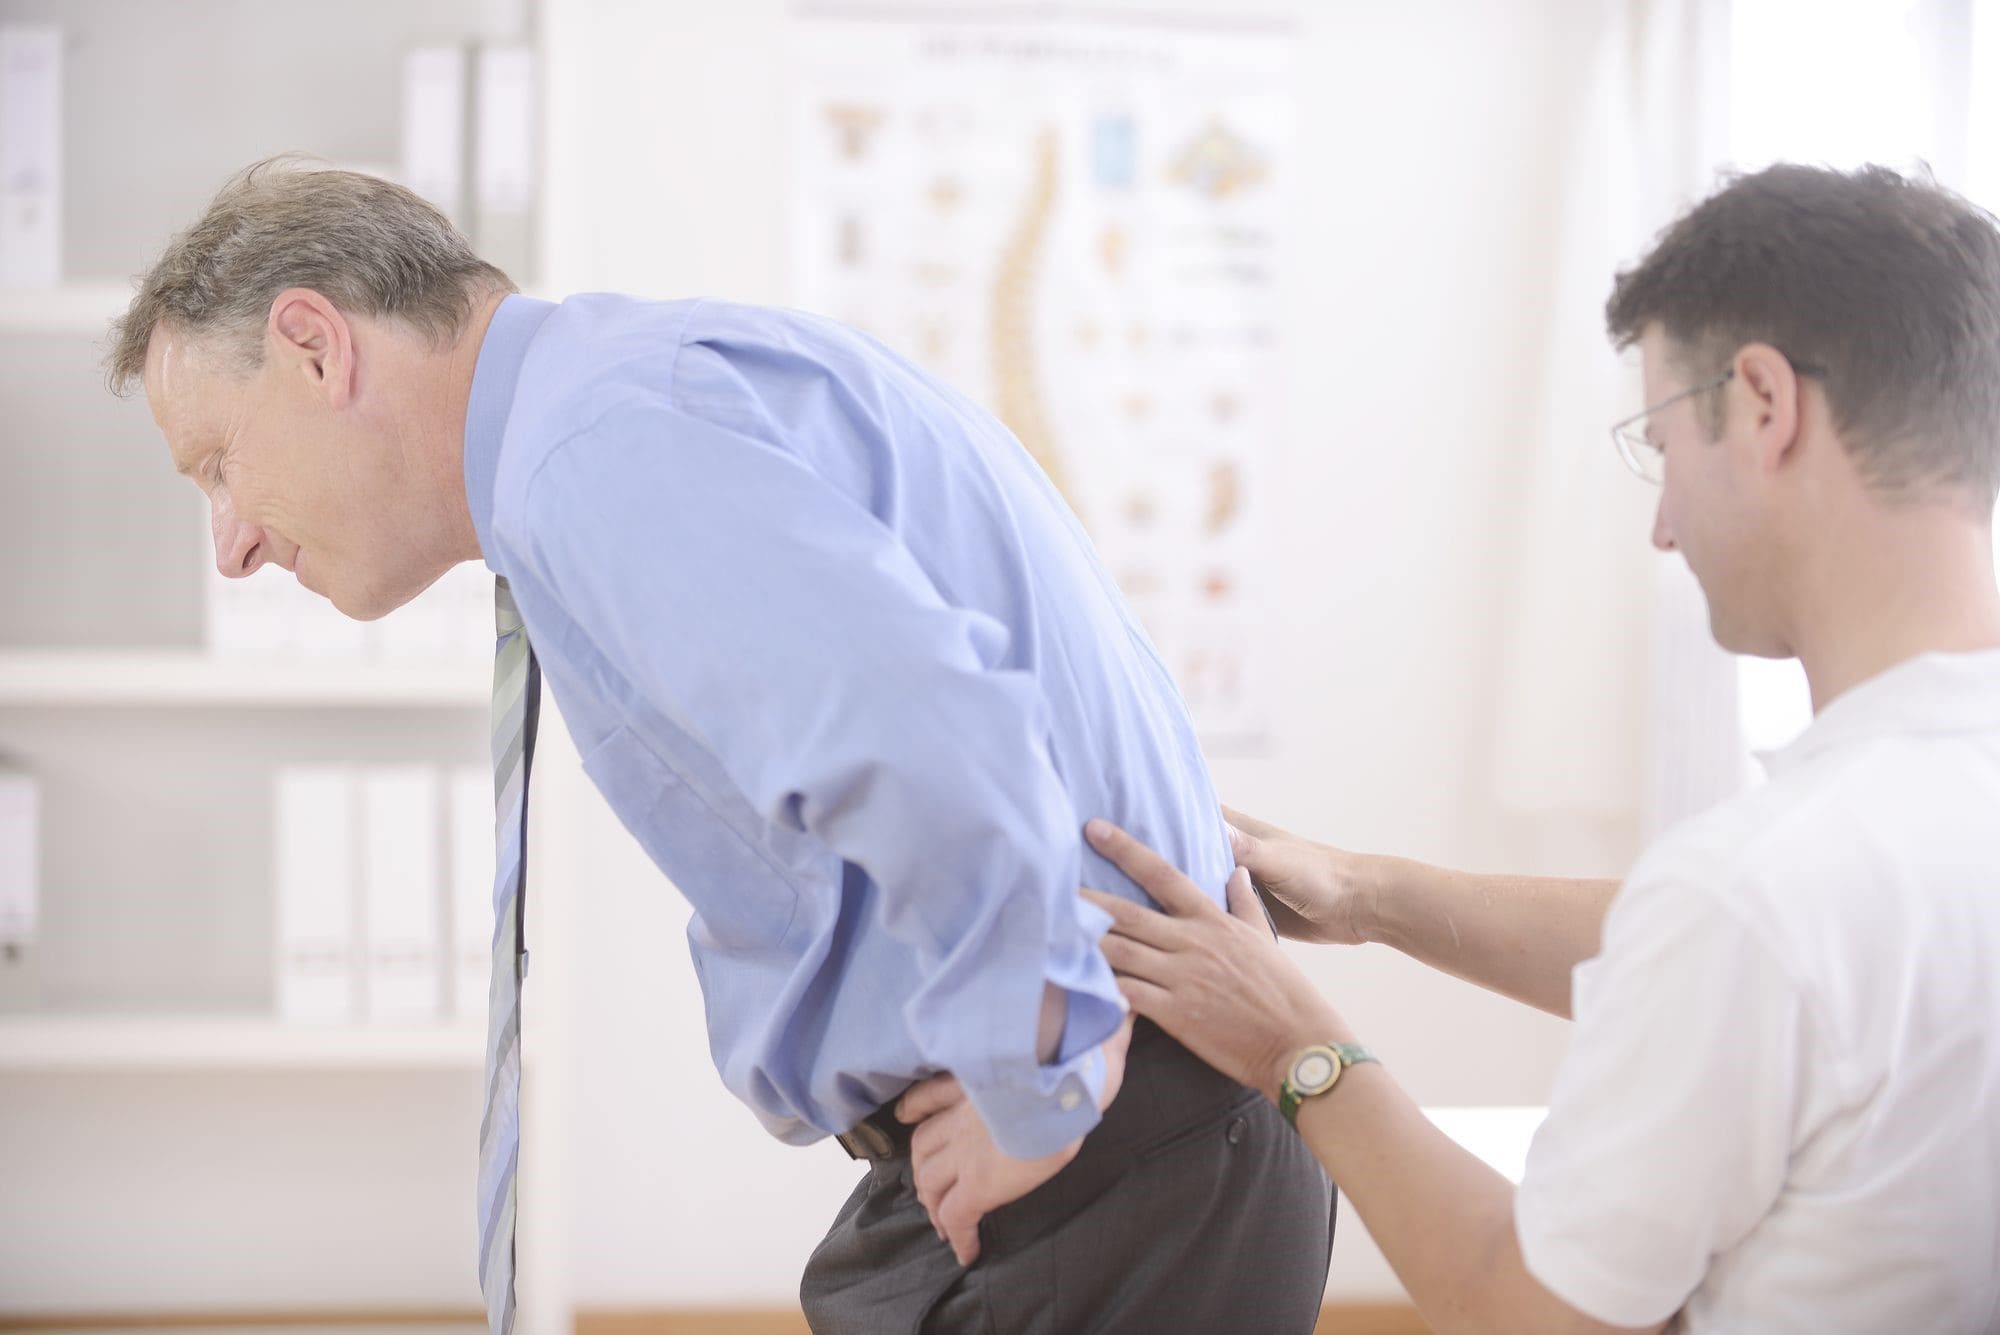 Live a Healthier Life with Help from Your Pain Management Doctors